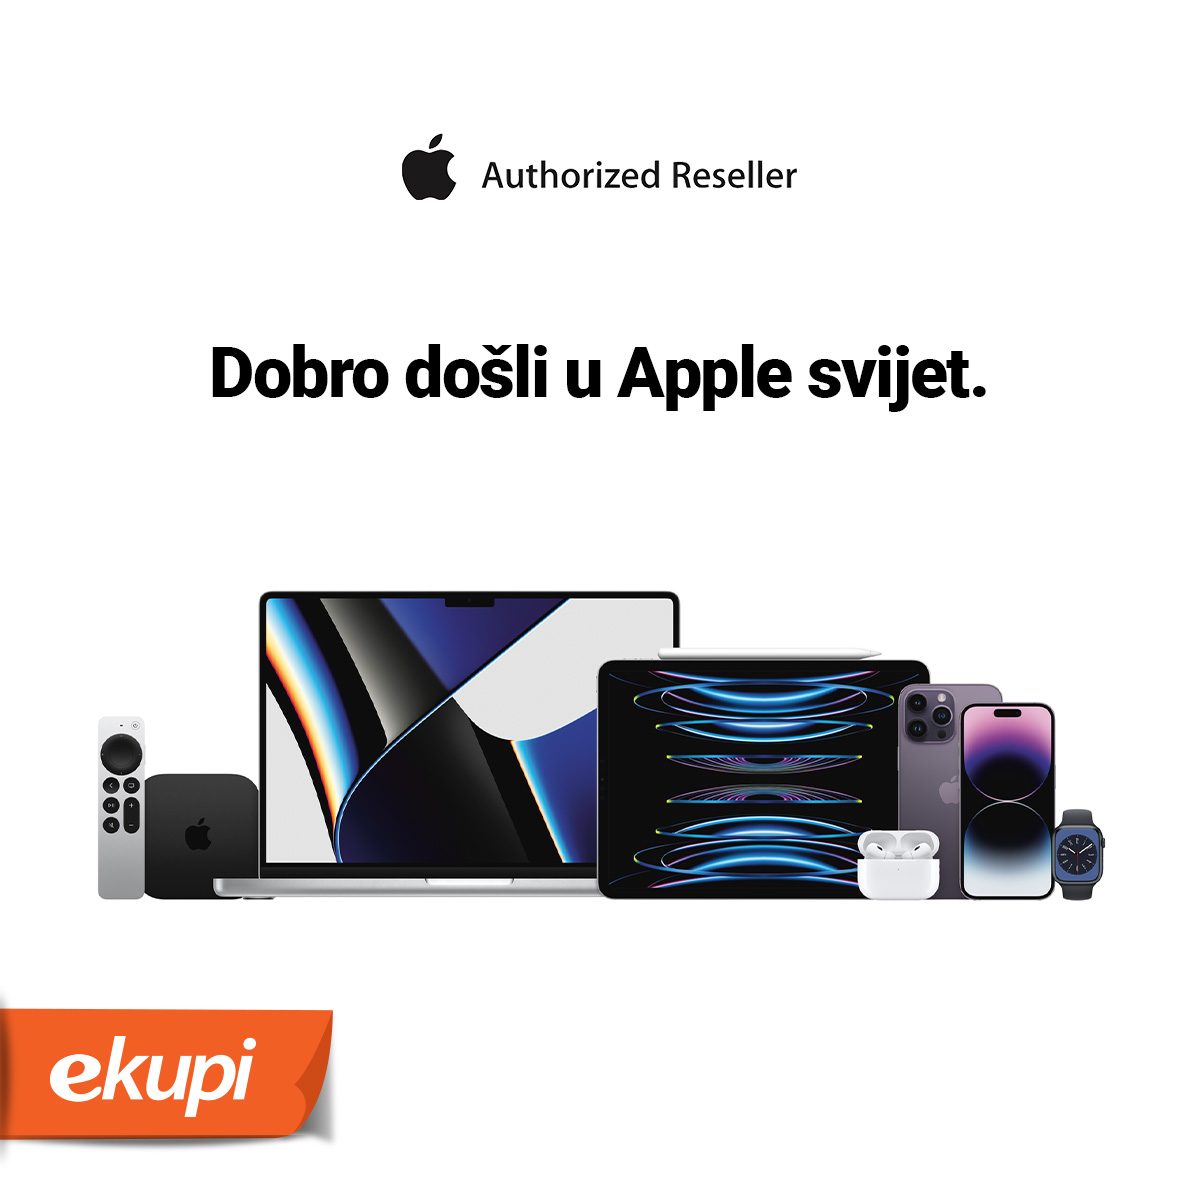 Apple Authorized Reseller